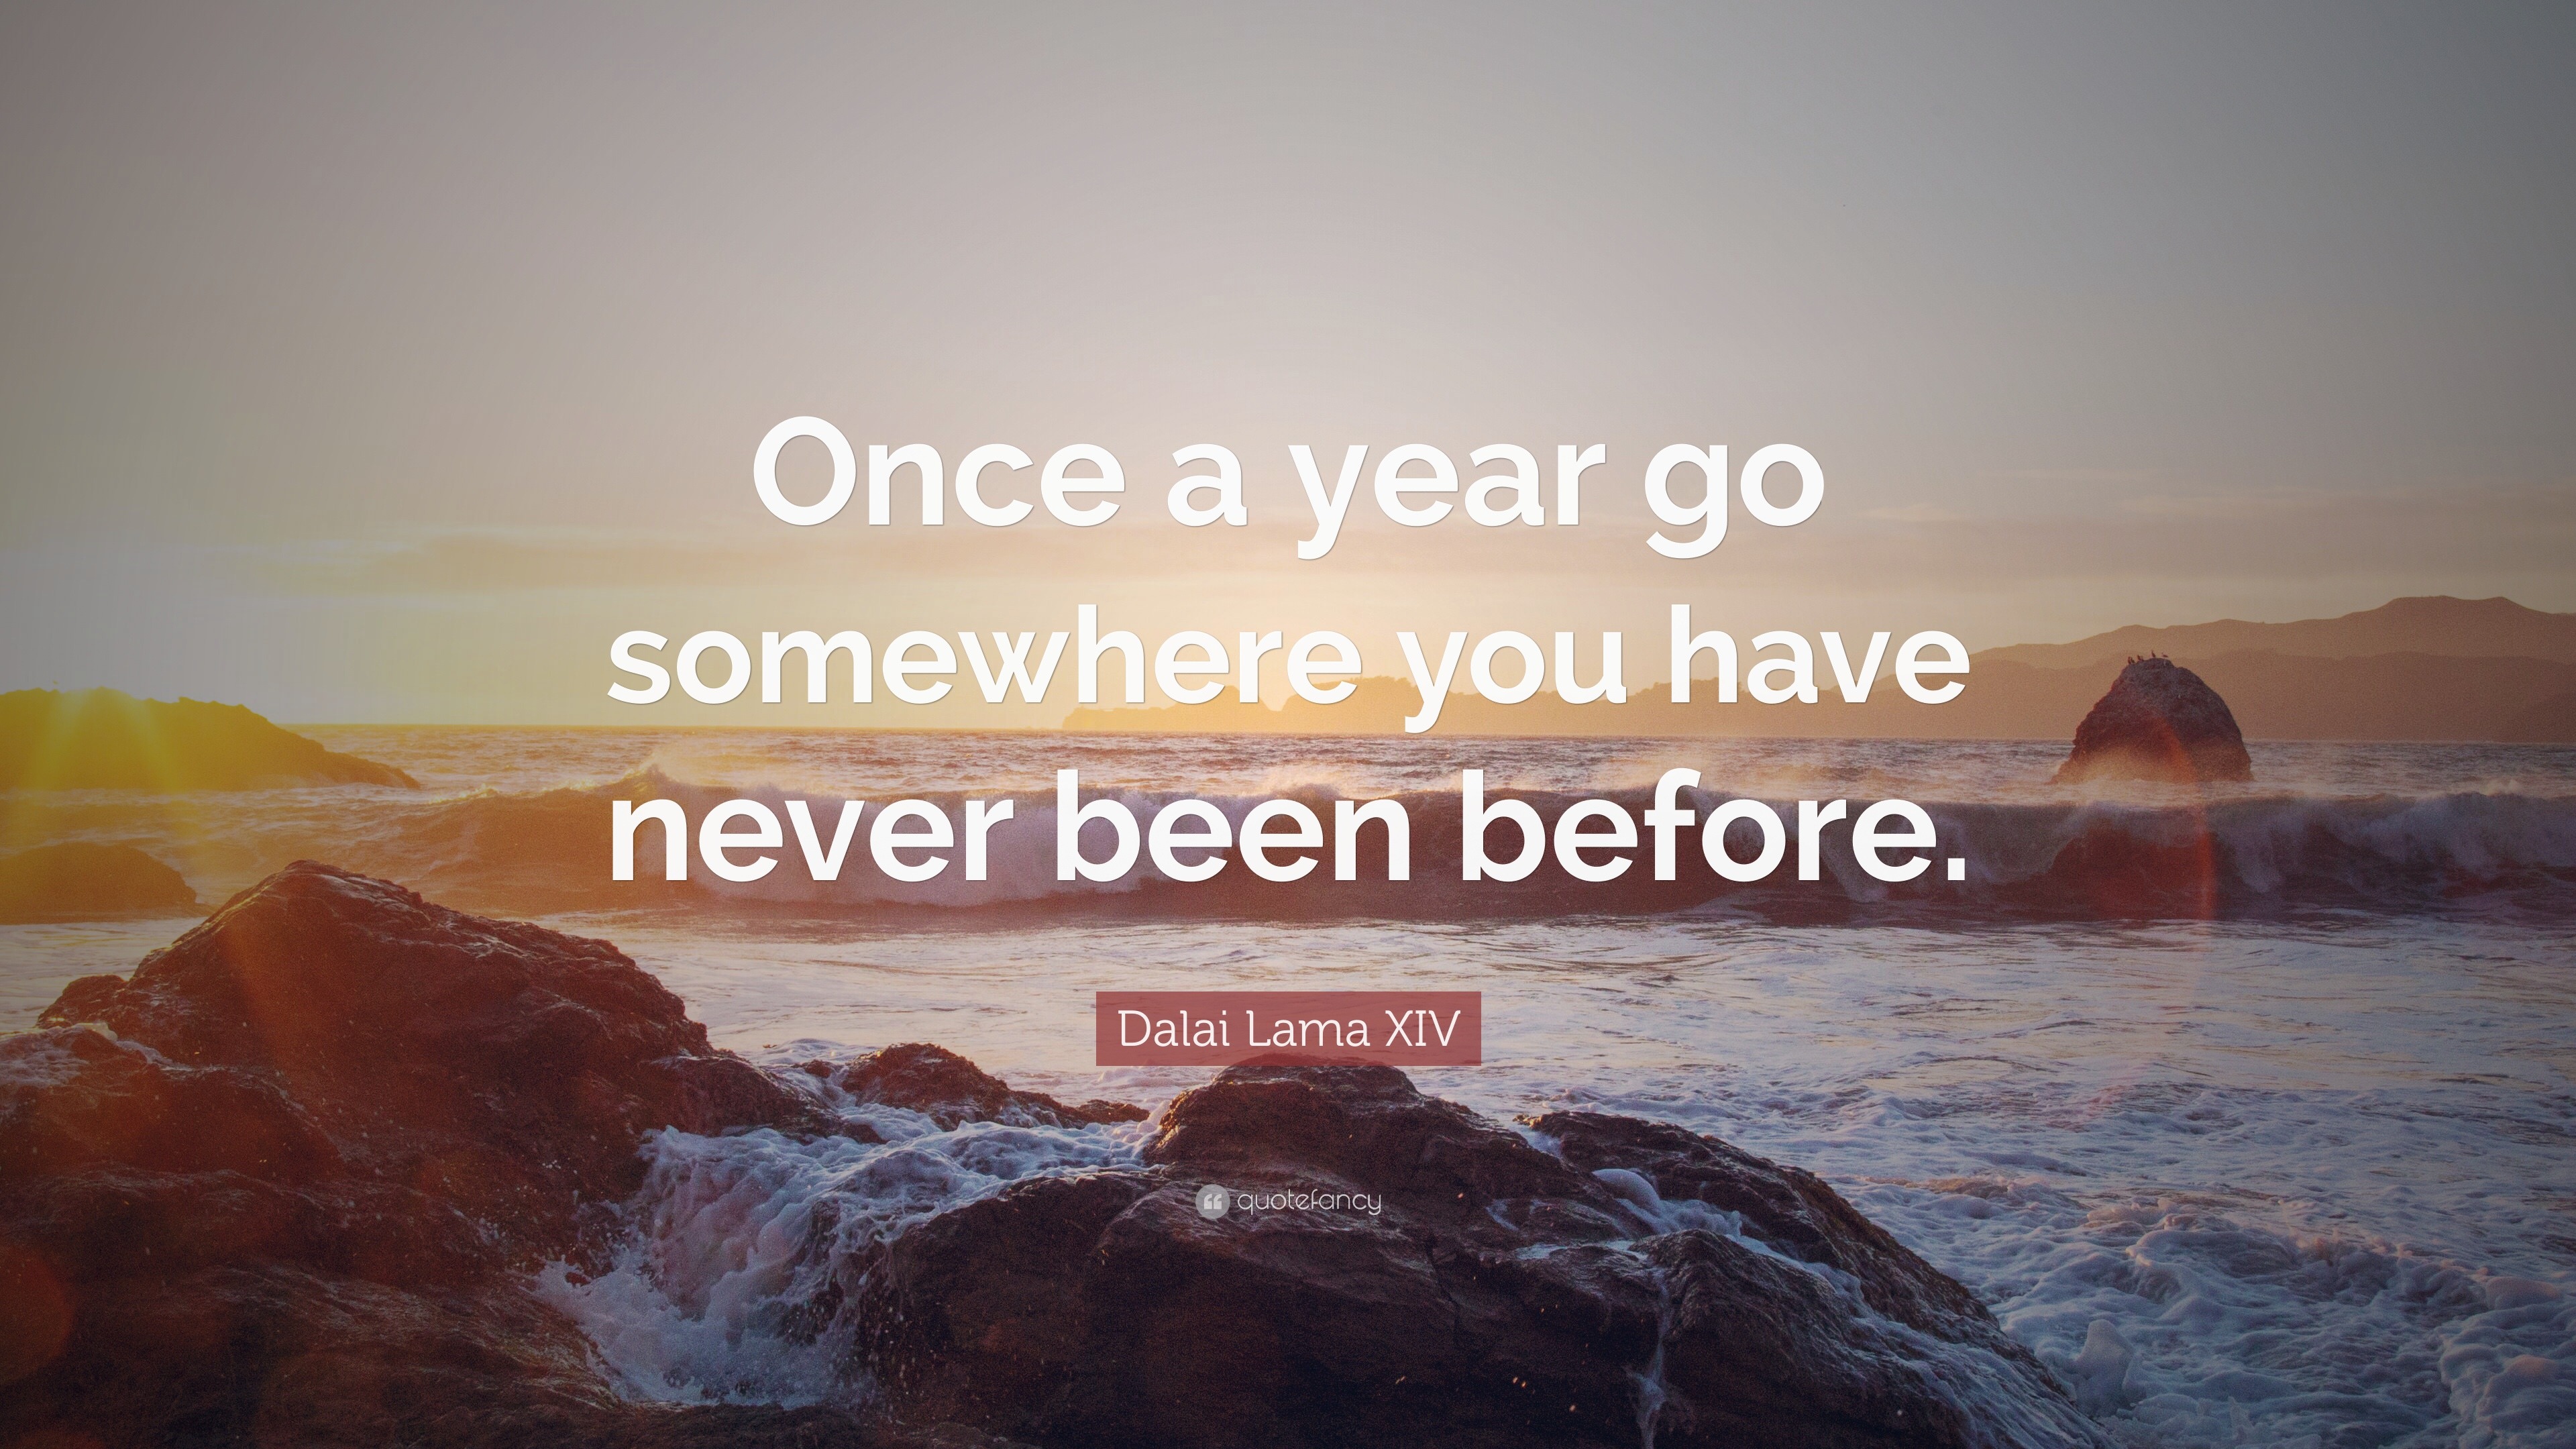 Dalai Lama XIV Quote: “Once a year go somewhere you have never been